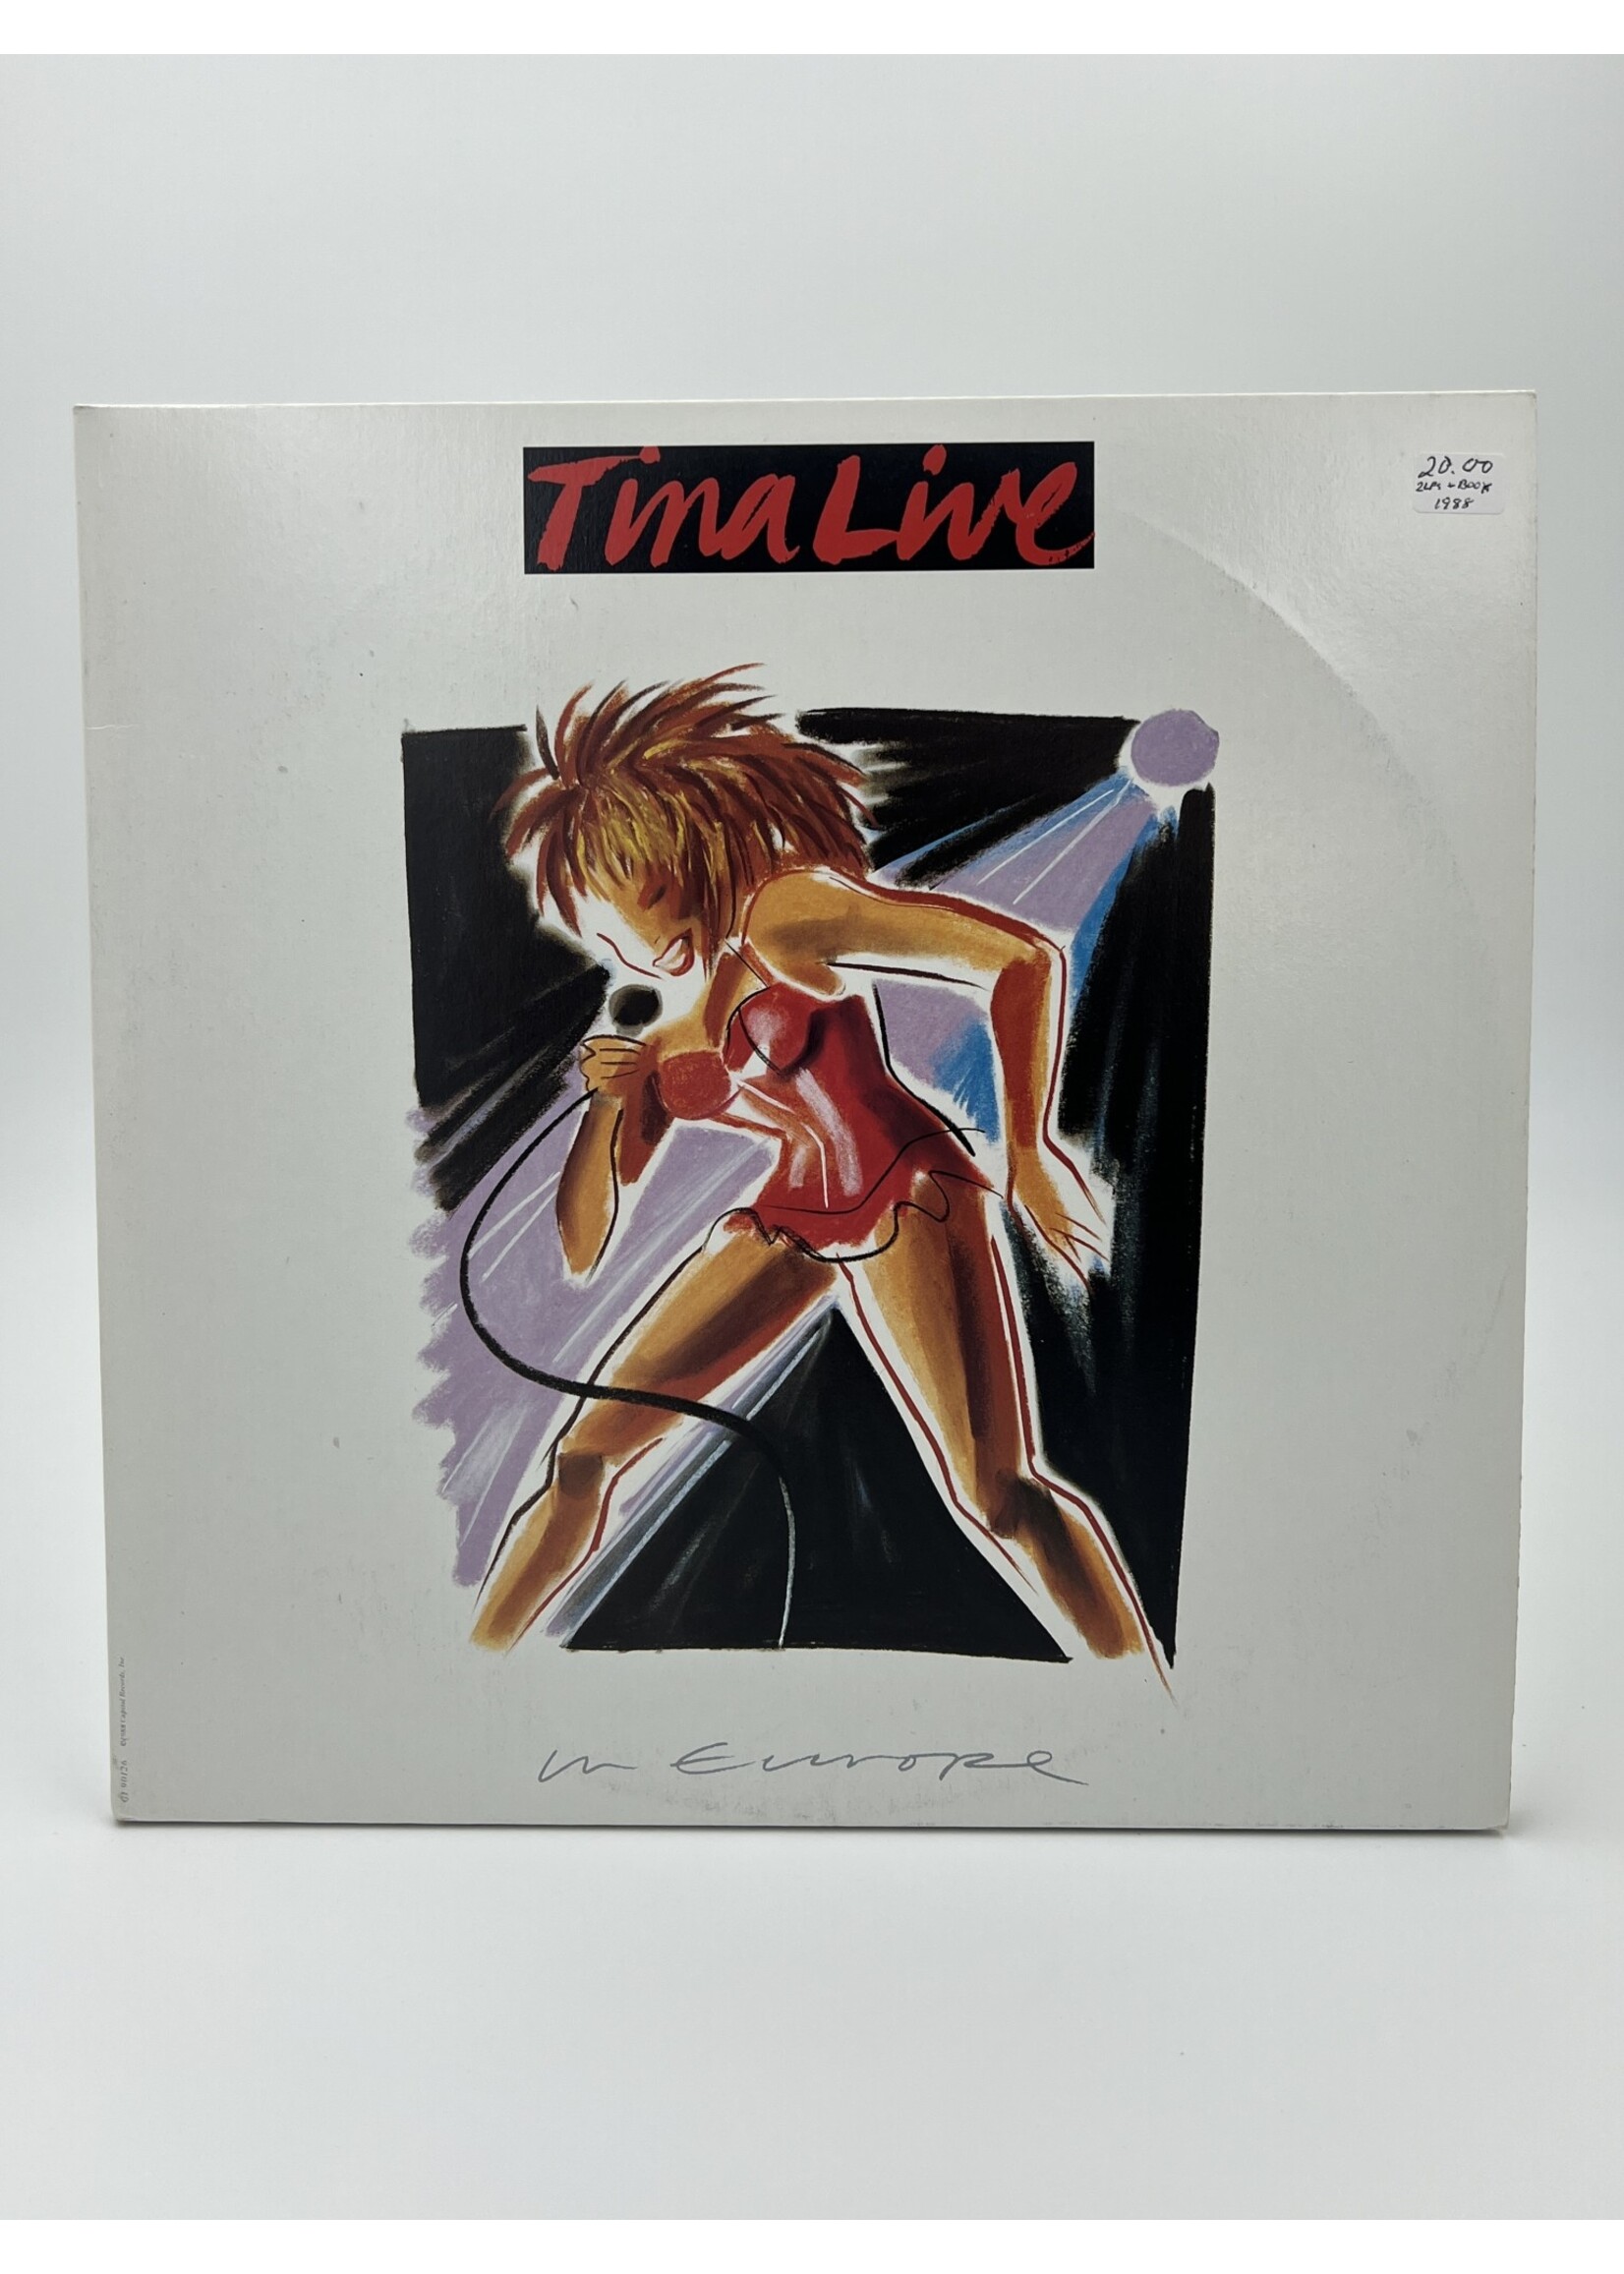 LP   Tina Turner Live In Europe 2 LP And Book Record